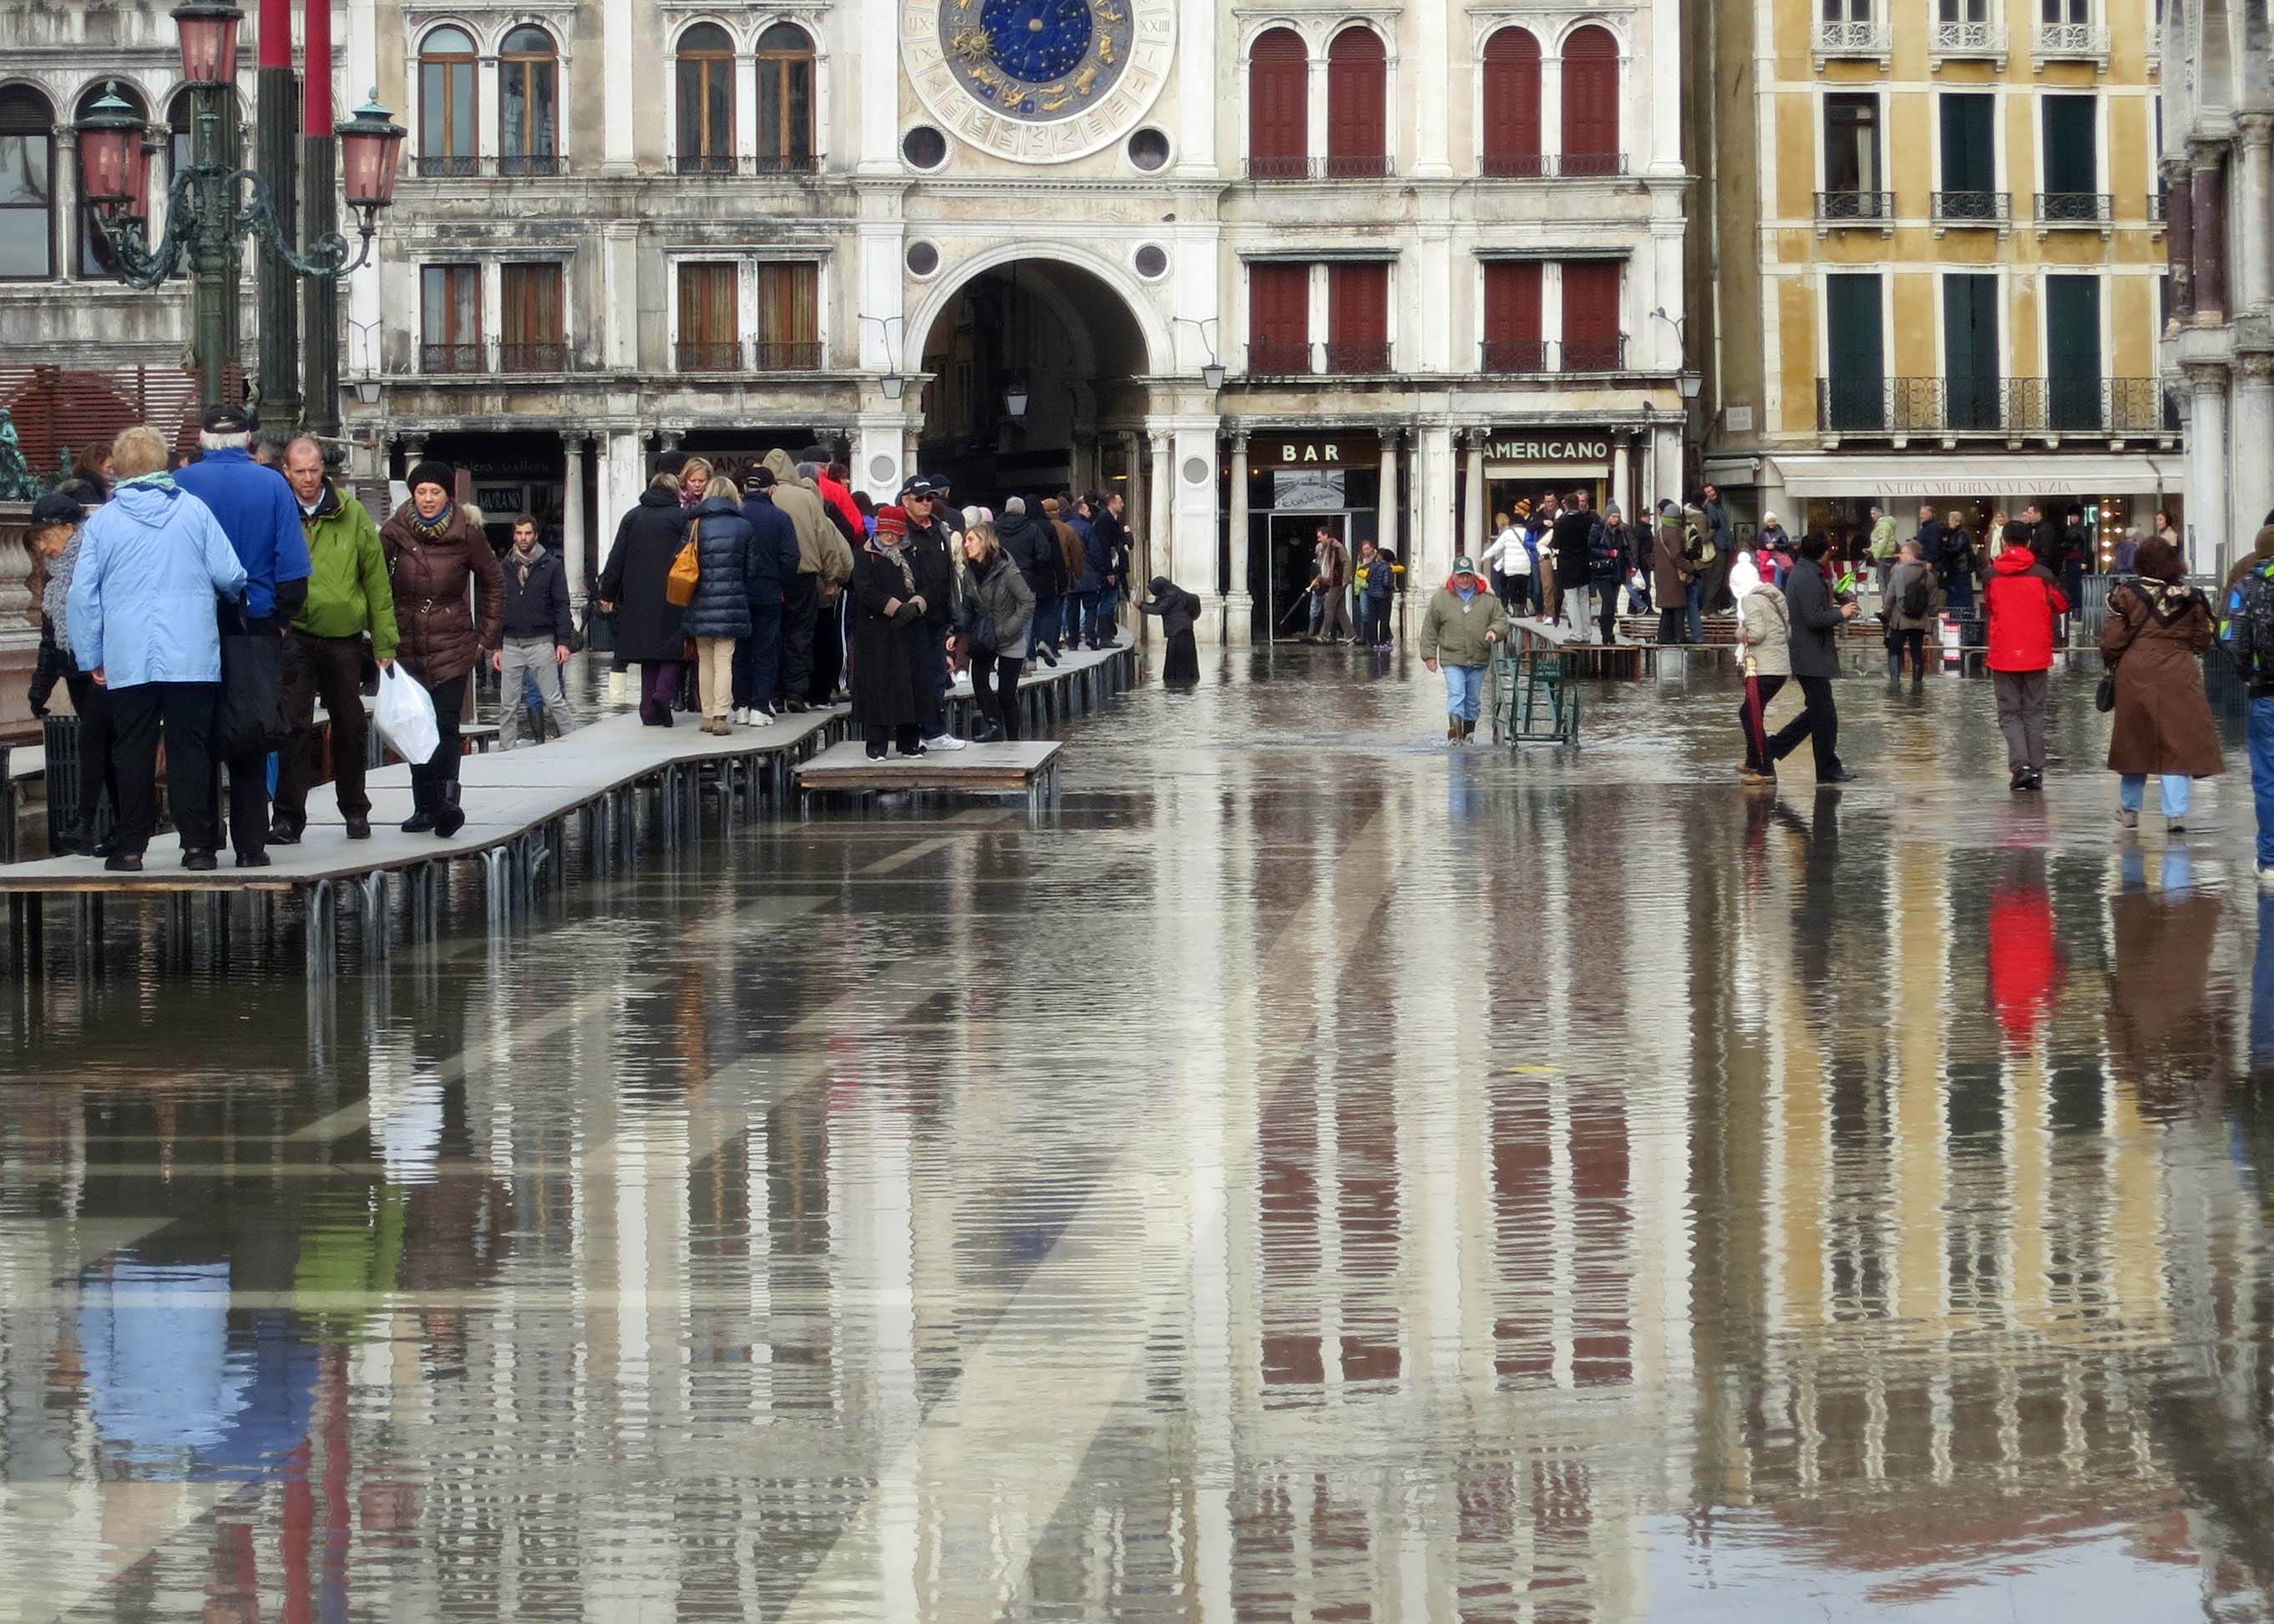 As I mentioned, Venice is subject to frequent floods. Global warming has added to this problem. This shot, taken just below the Clock Tower in St. Mark's Square, shows people using the table walkways and walking through the water.